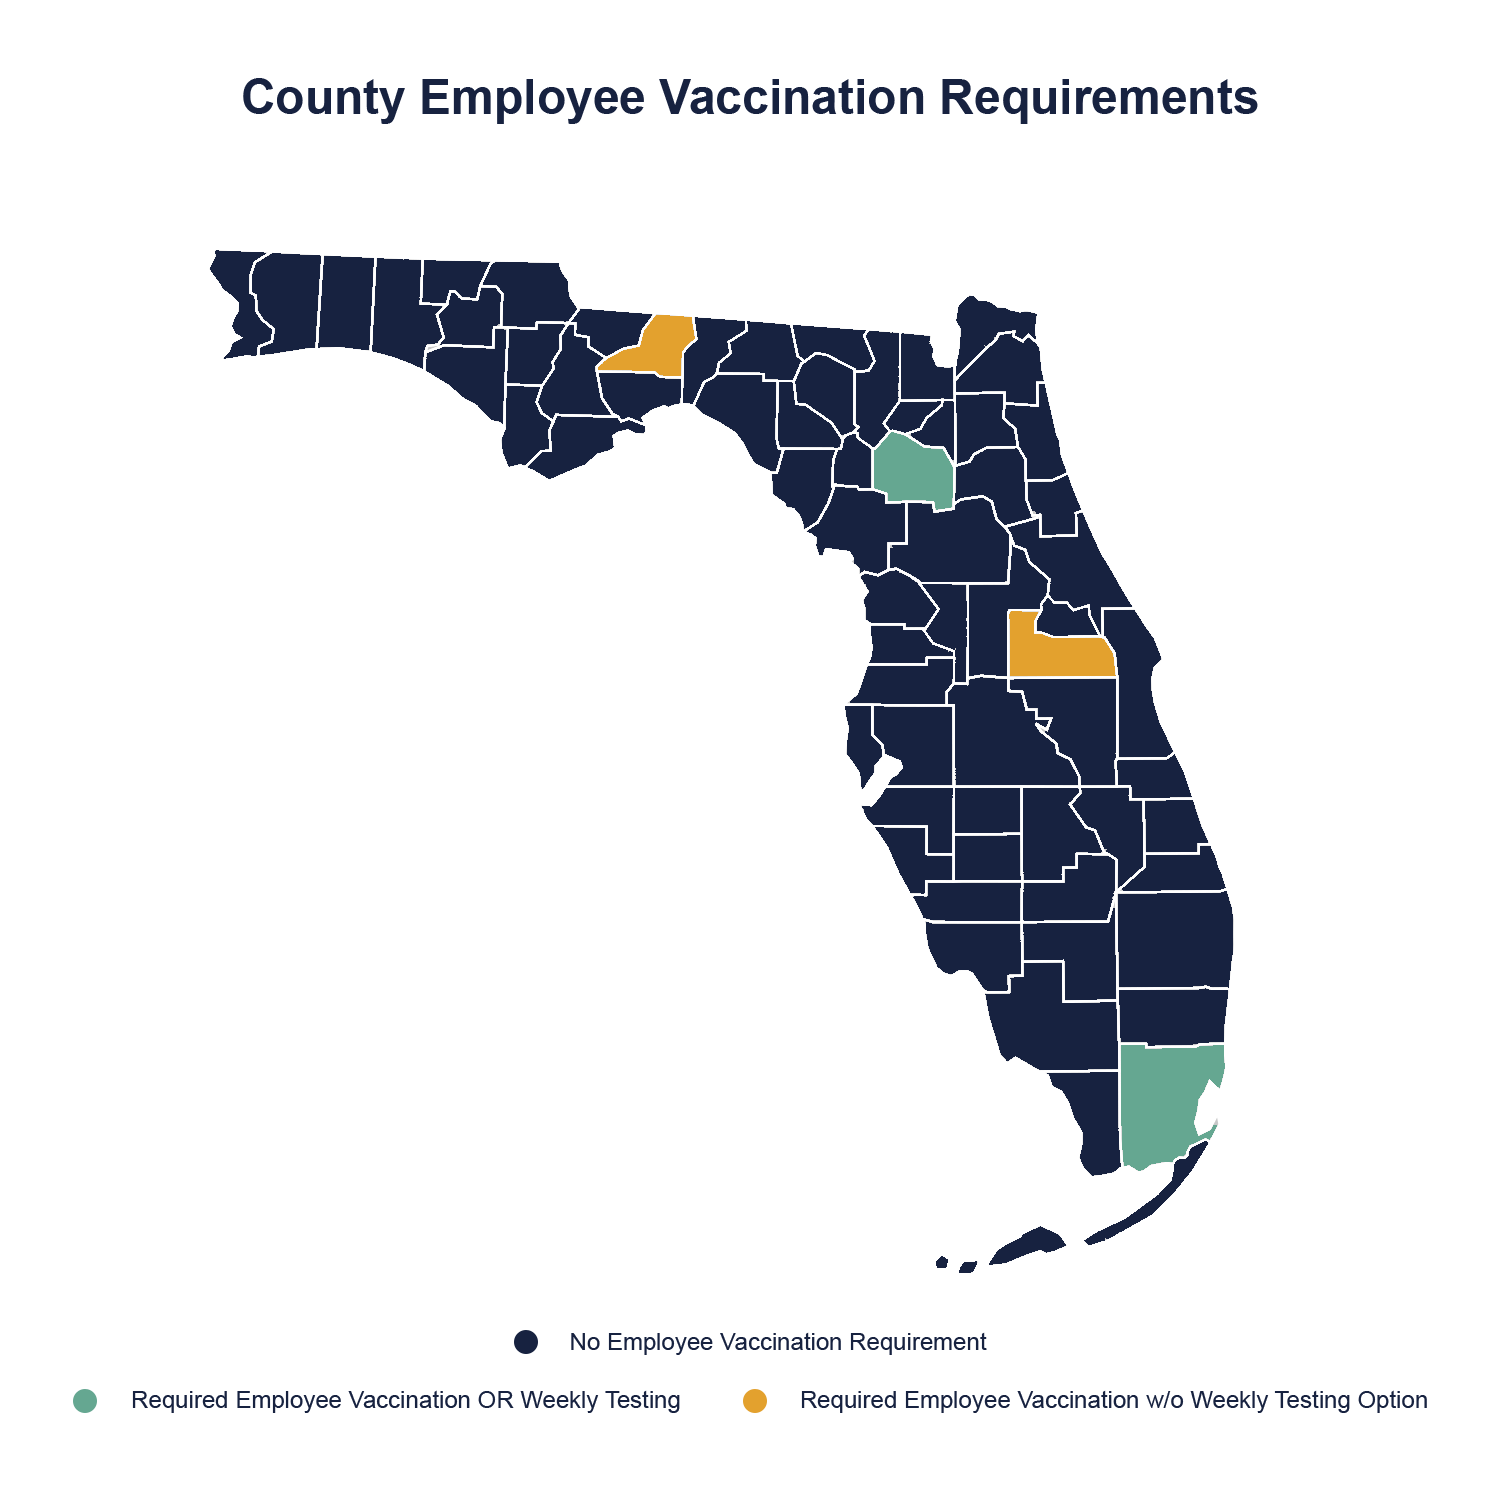 Florida County Map (COVID Data – Vaccination Requirements 10-4-21)